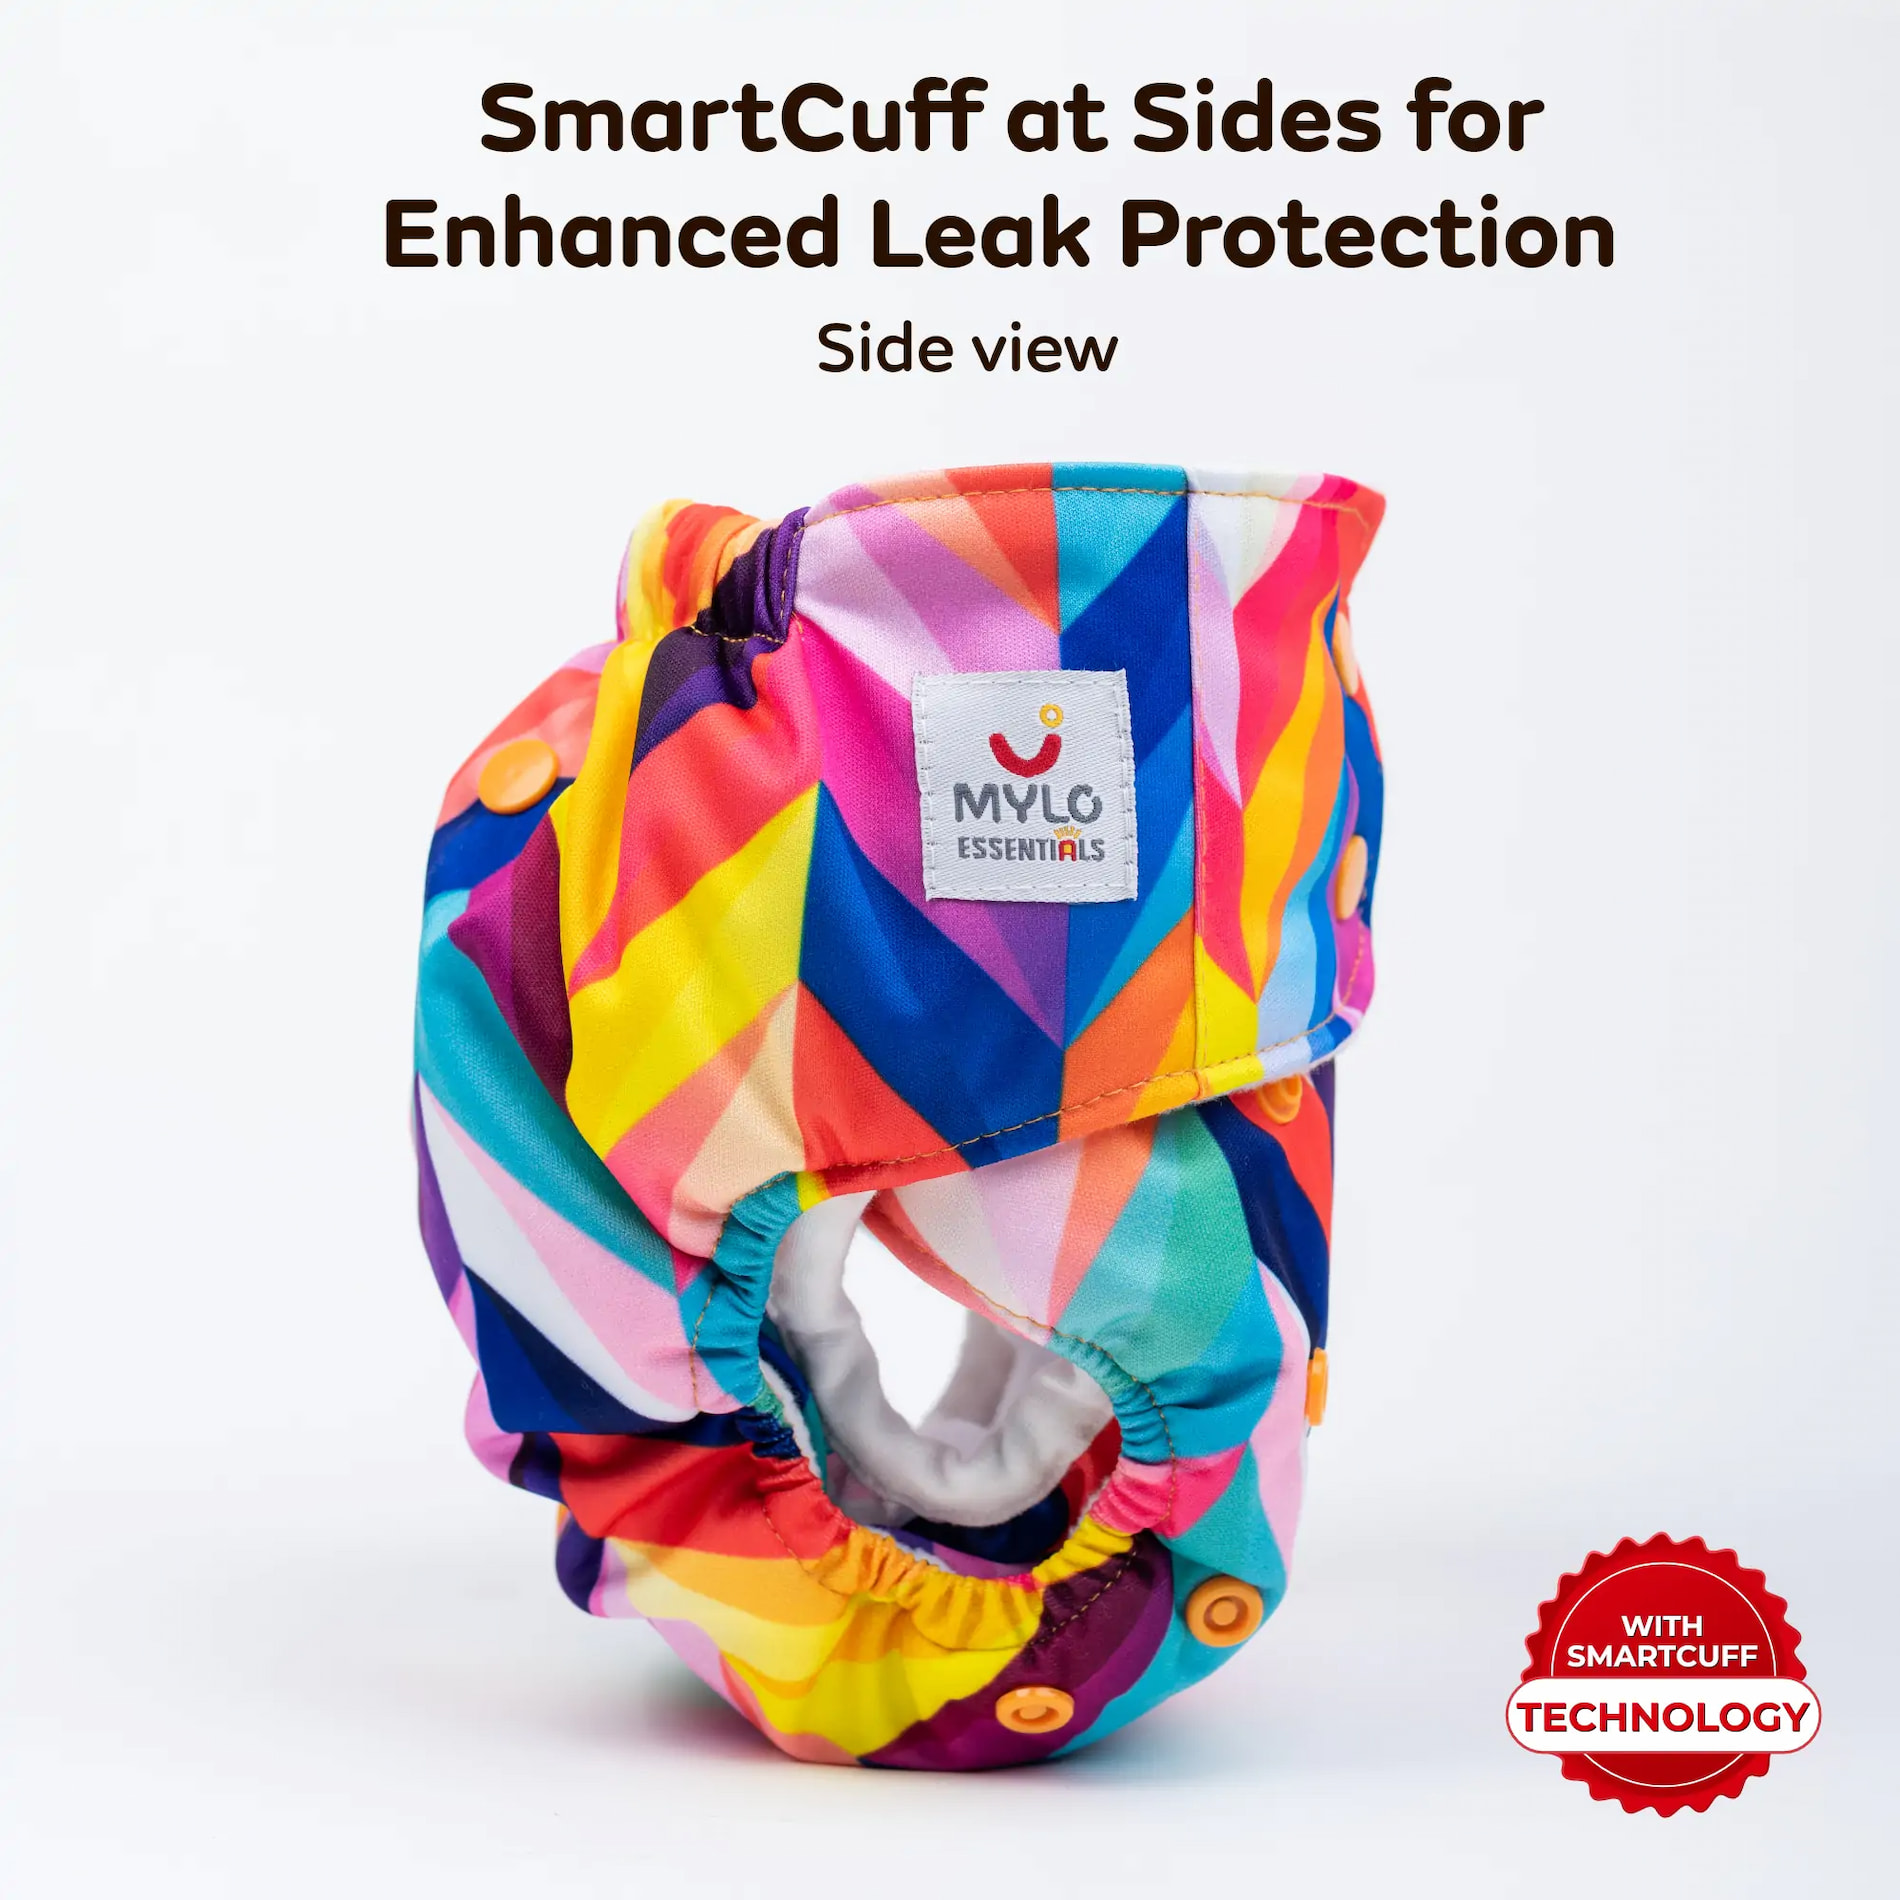 Mylo Adjustable Washable & Reusable Top lay Cloth Diaper with SmartCuff Technology for Enhanced Leak Protection-Comes with 1 Dry Feel Absorbent Insert Pad  (3M-3Y)- Rainbow